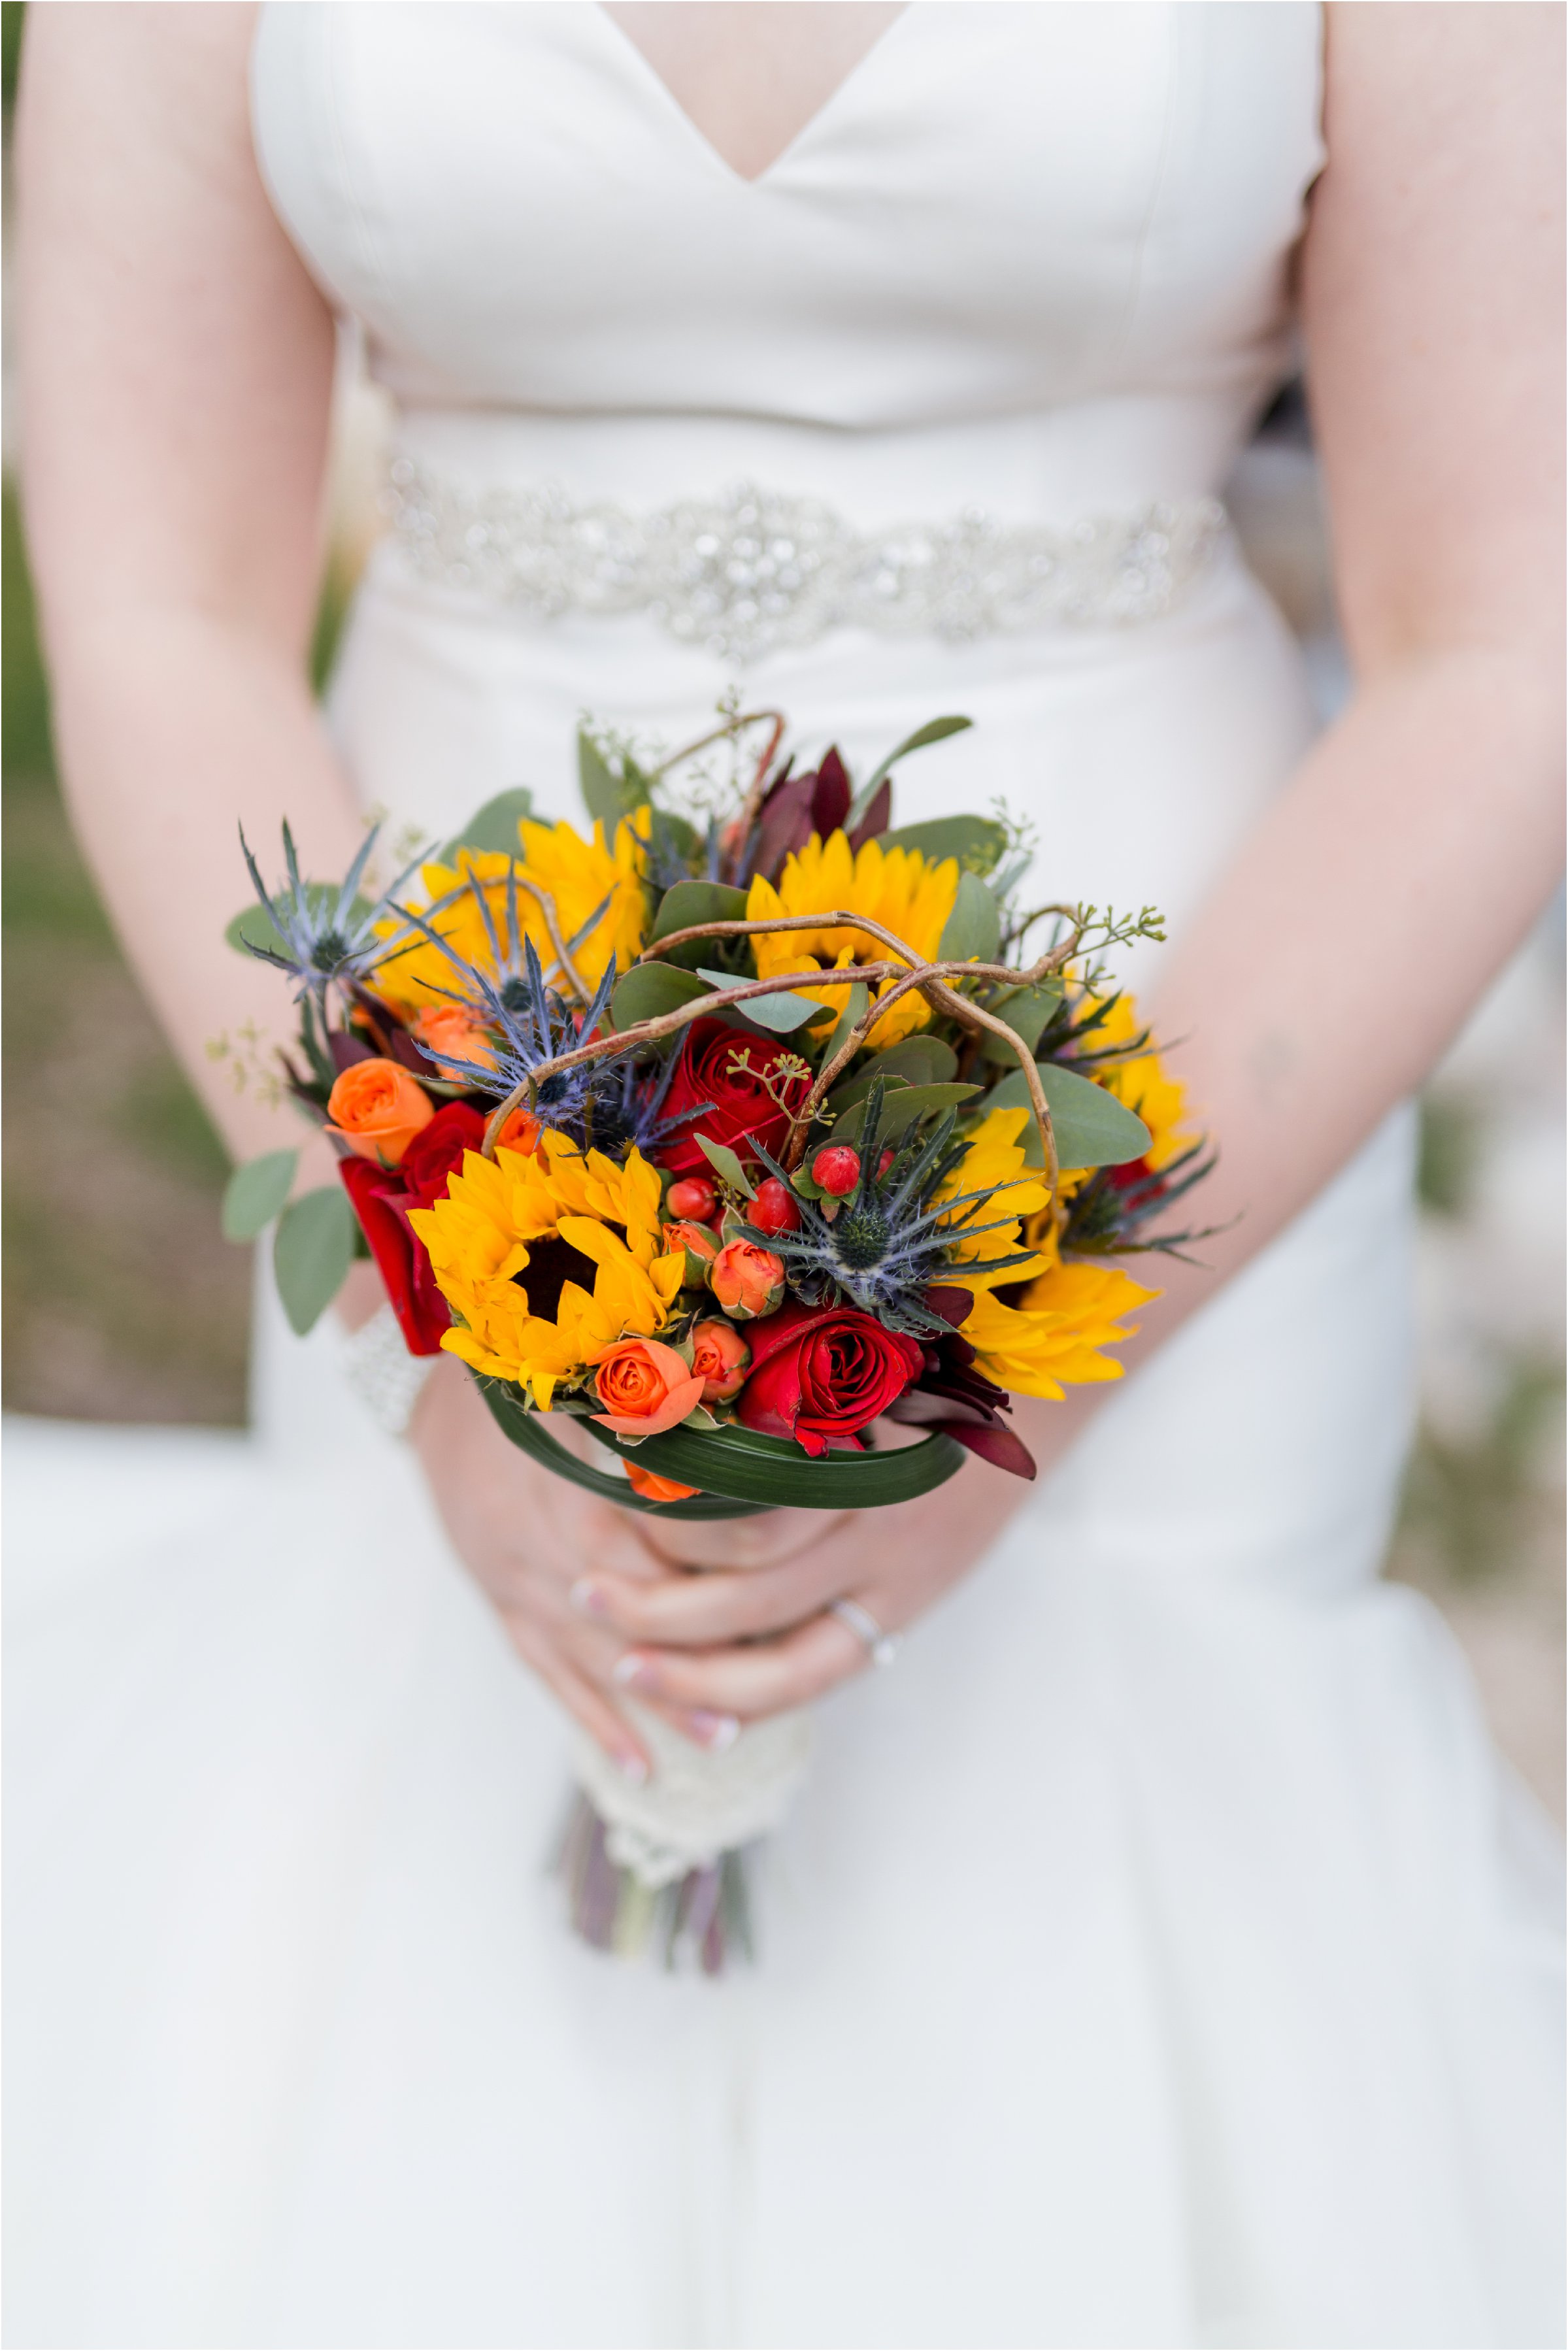 bride's bouquet made up of sunflowers, red roses, and whild flowers along with twigs